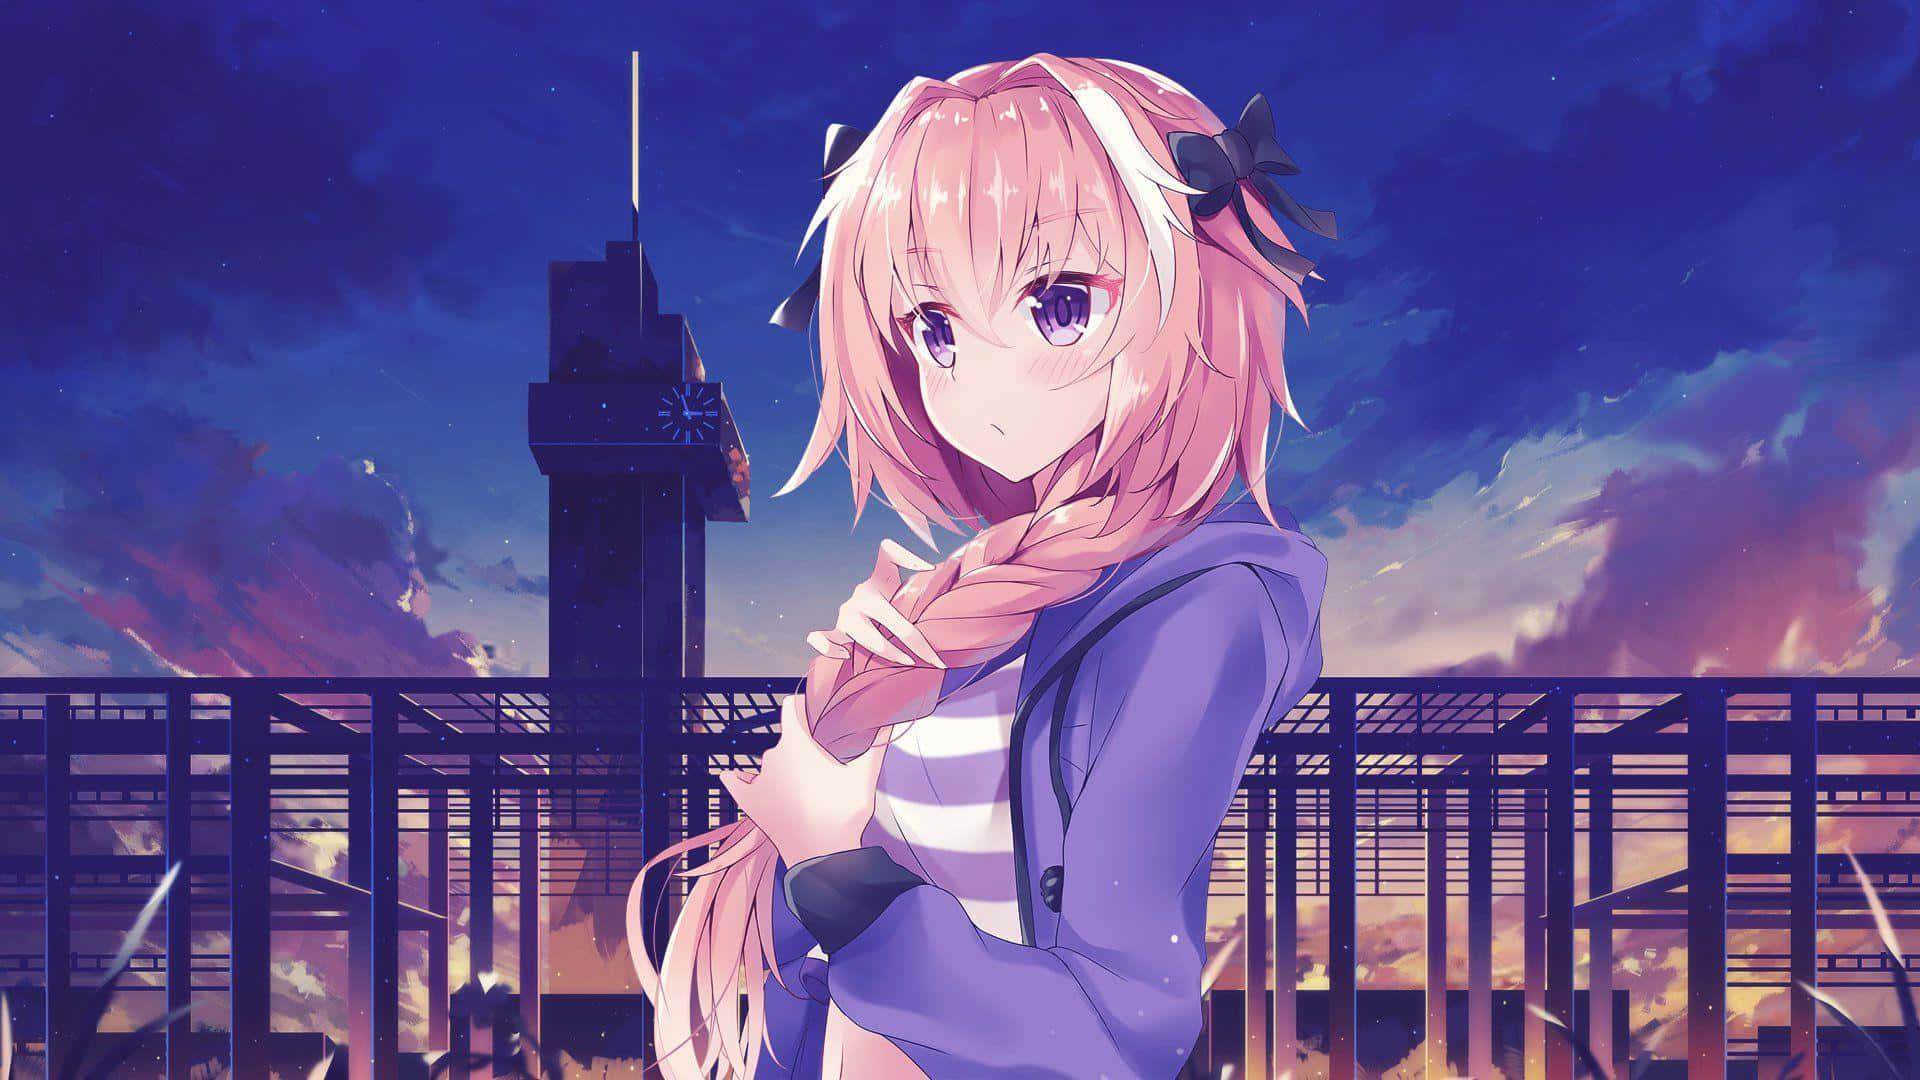 Anime Girl With Pink Hair Standing In Front Of A Building